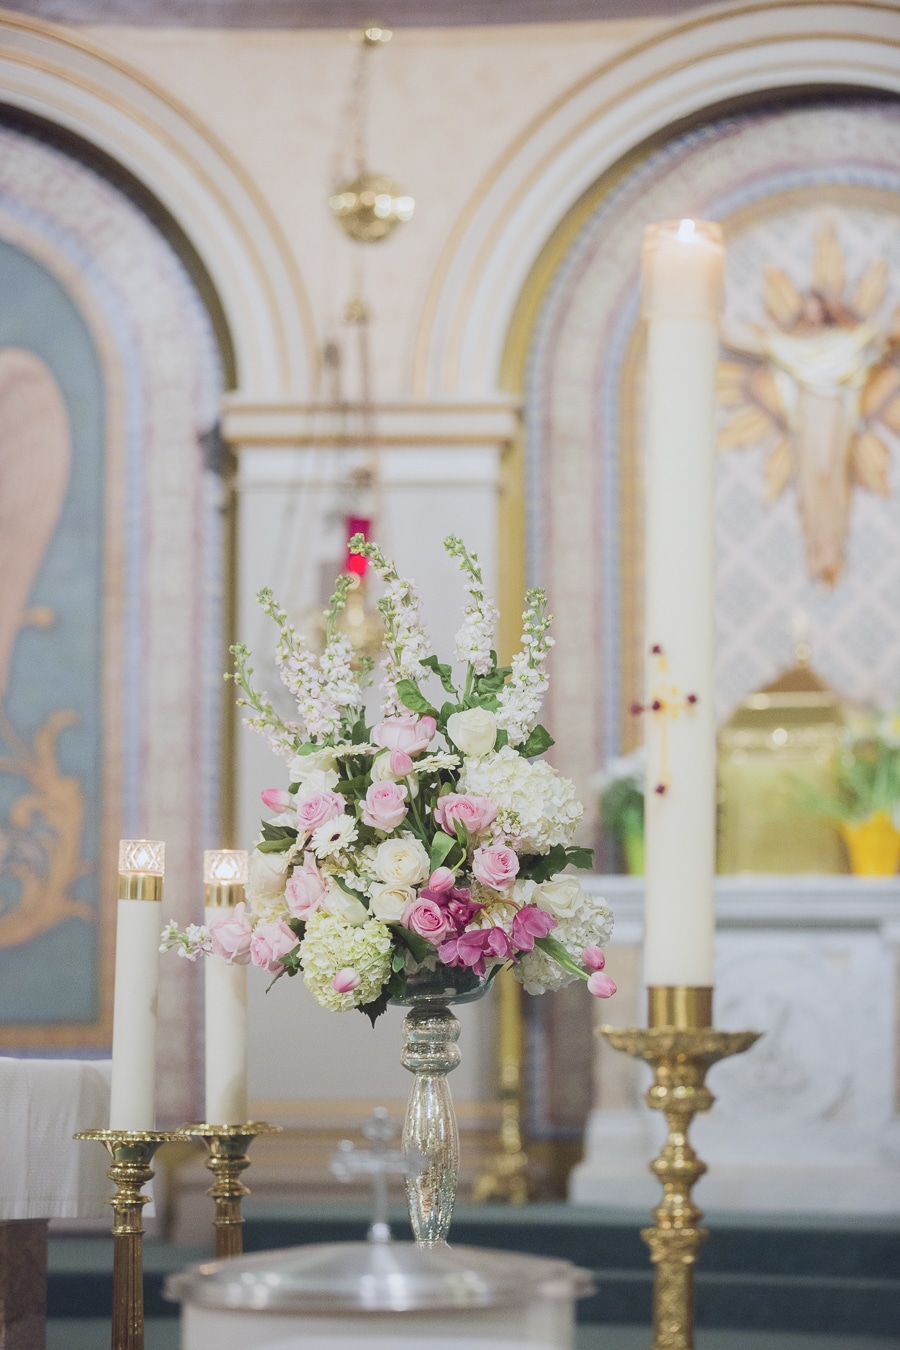 Romantic pink and white floral arrangement at the wedding ceremony. See more at Rebecca Chan Weddings and Events https://www.rebeccachan.ca